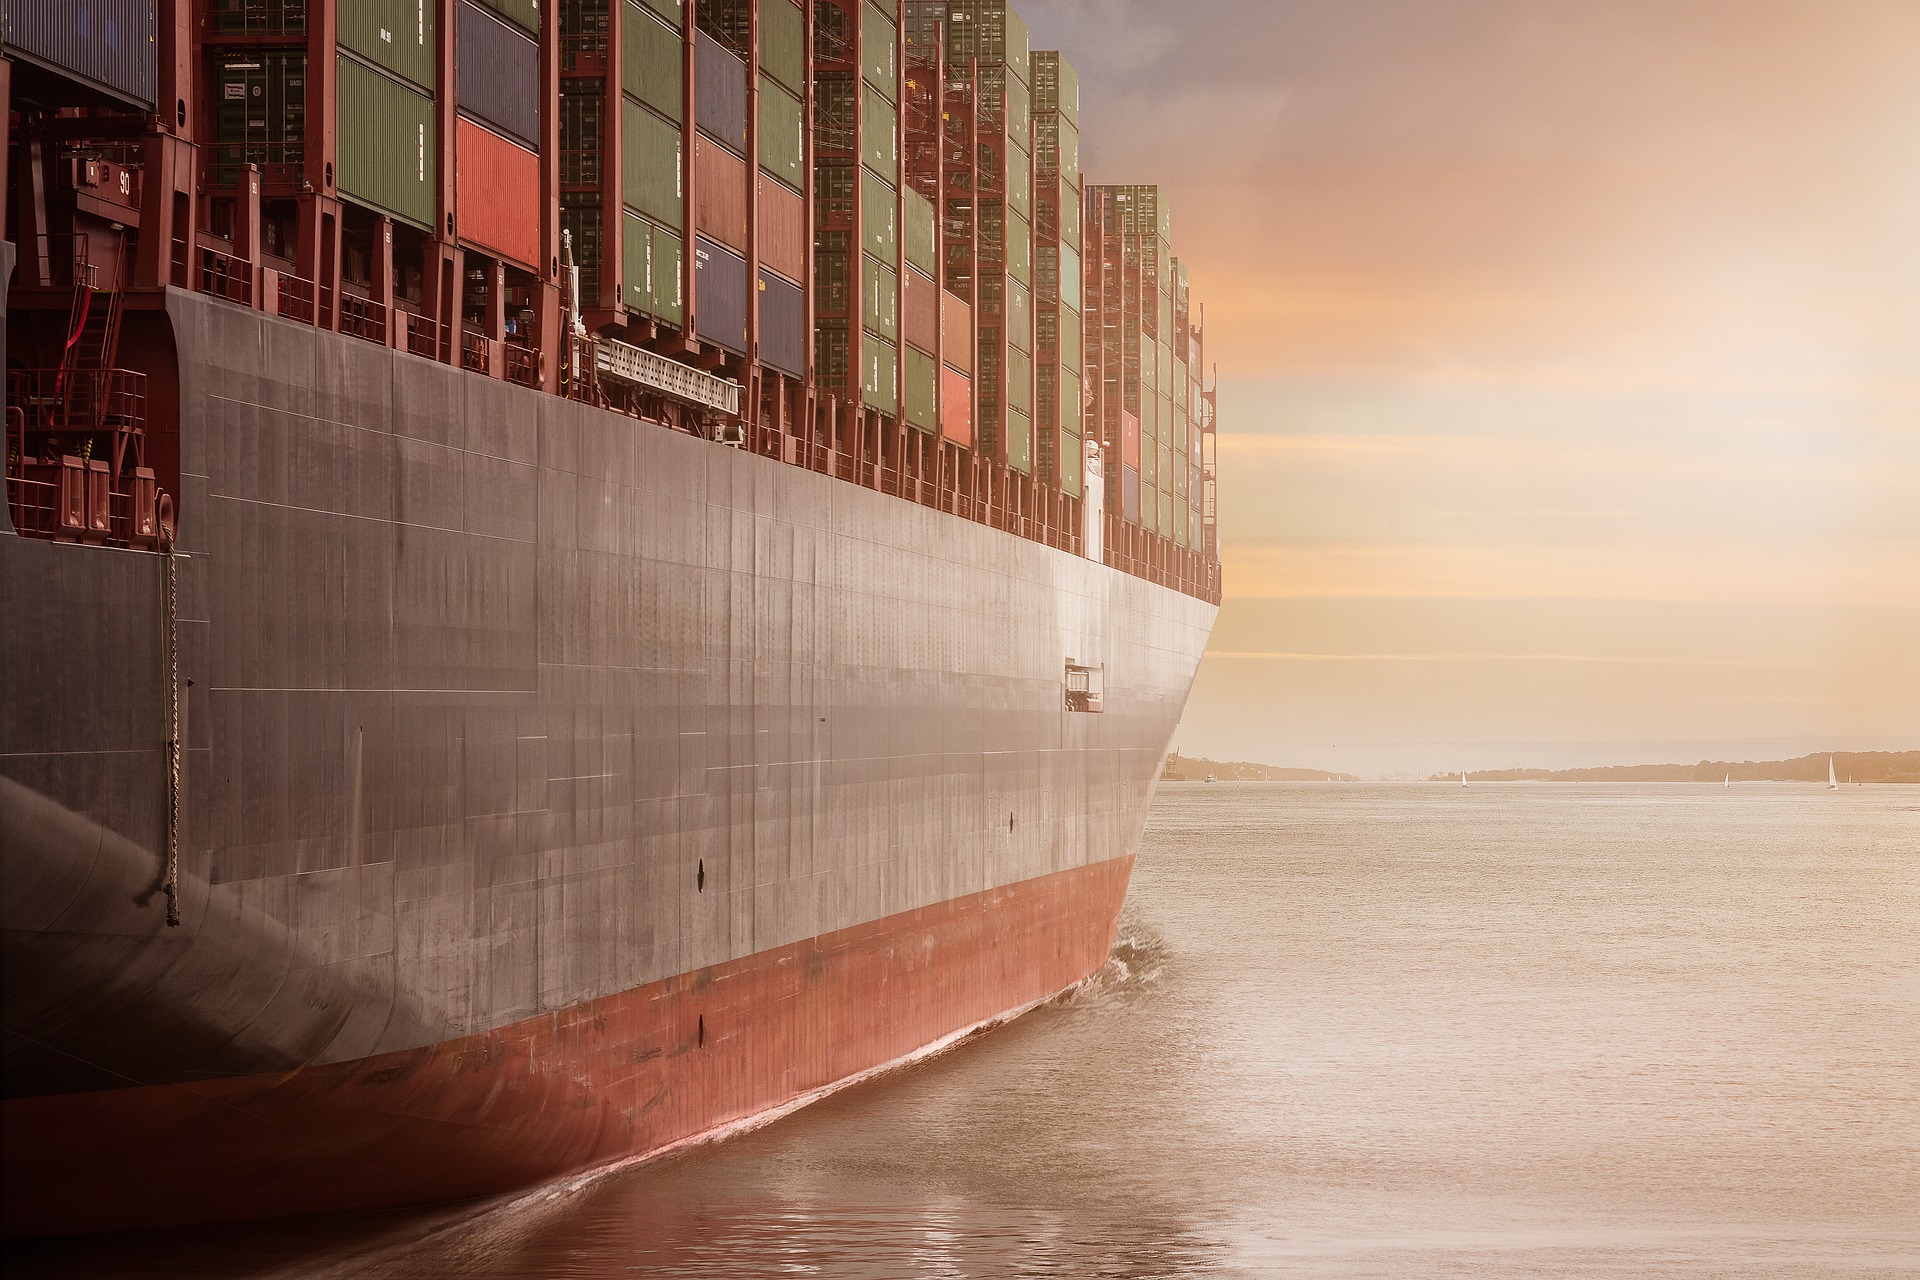 Reducing Greenhouse Gas Emissions from Global Shipping